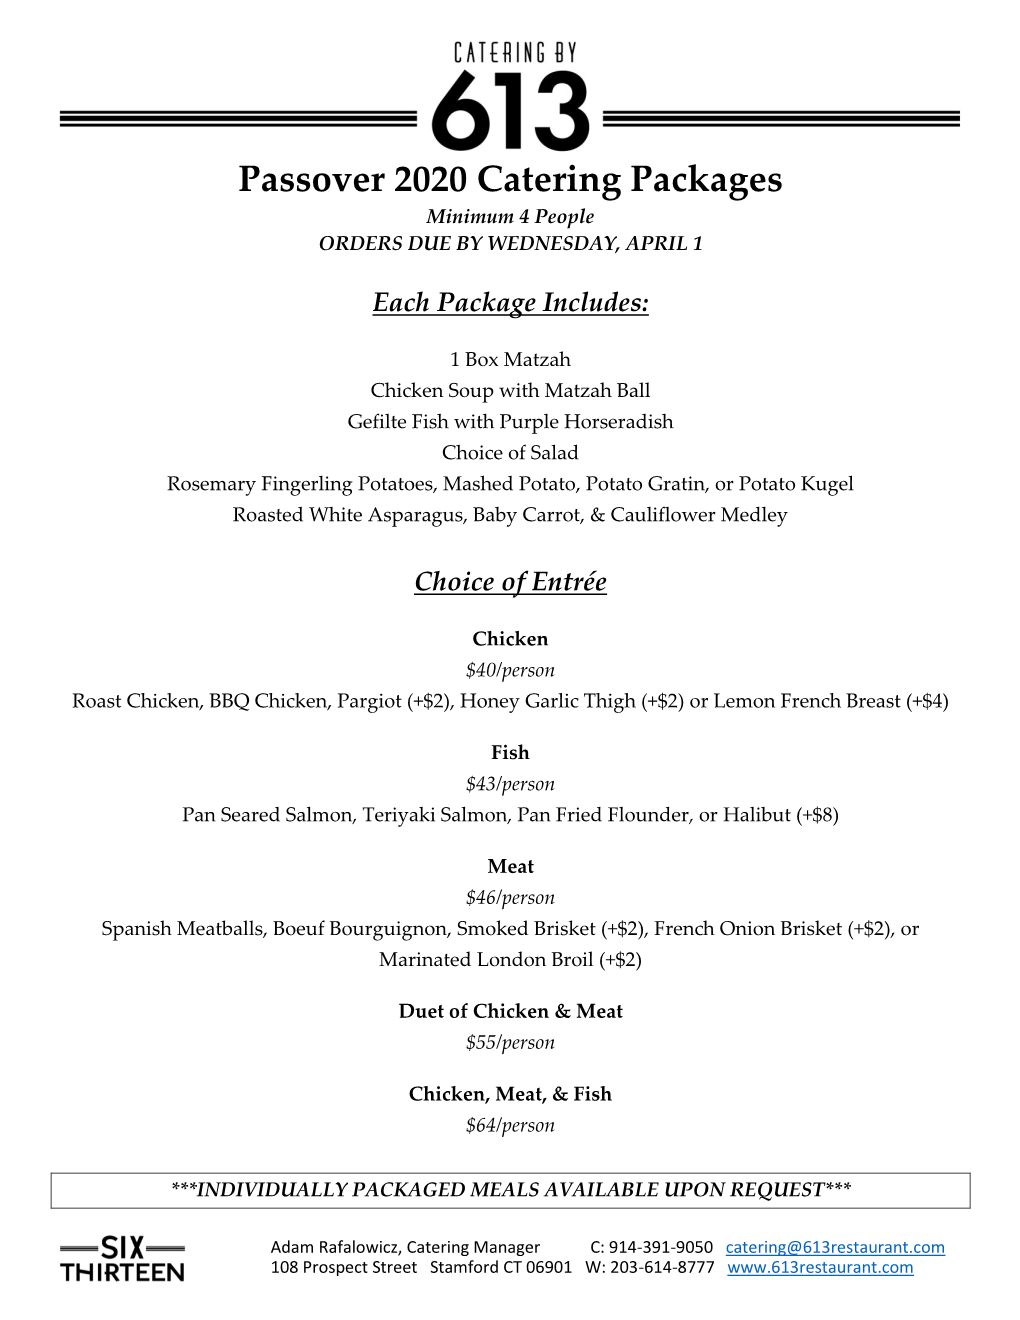 Passover 2020 Catering Packages Minimum 4 People ORDERS DUE by WEDNESDAY, APRIL 1